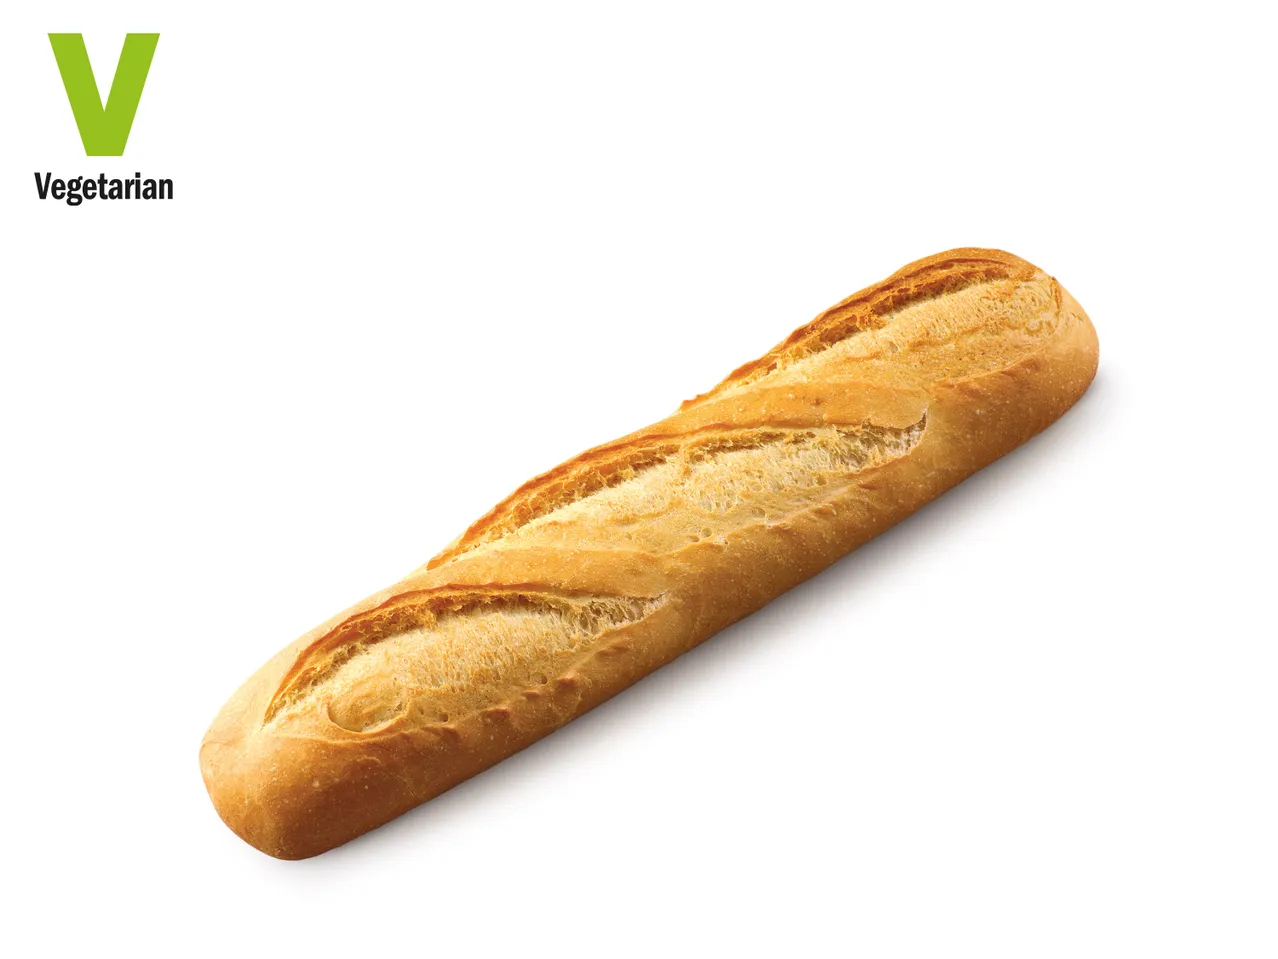 Go to full screen view: Demi Baguette - Image 1